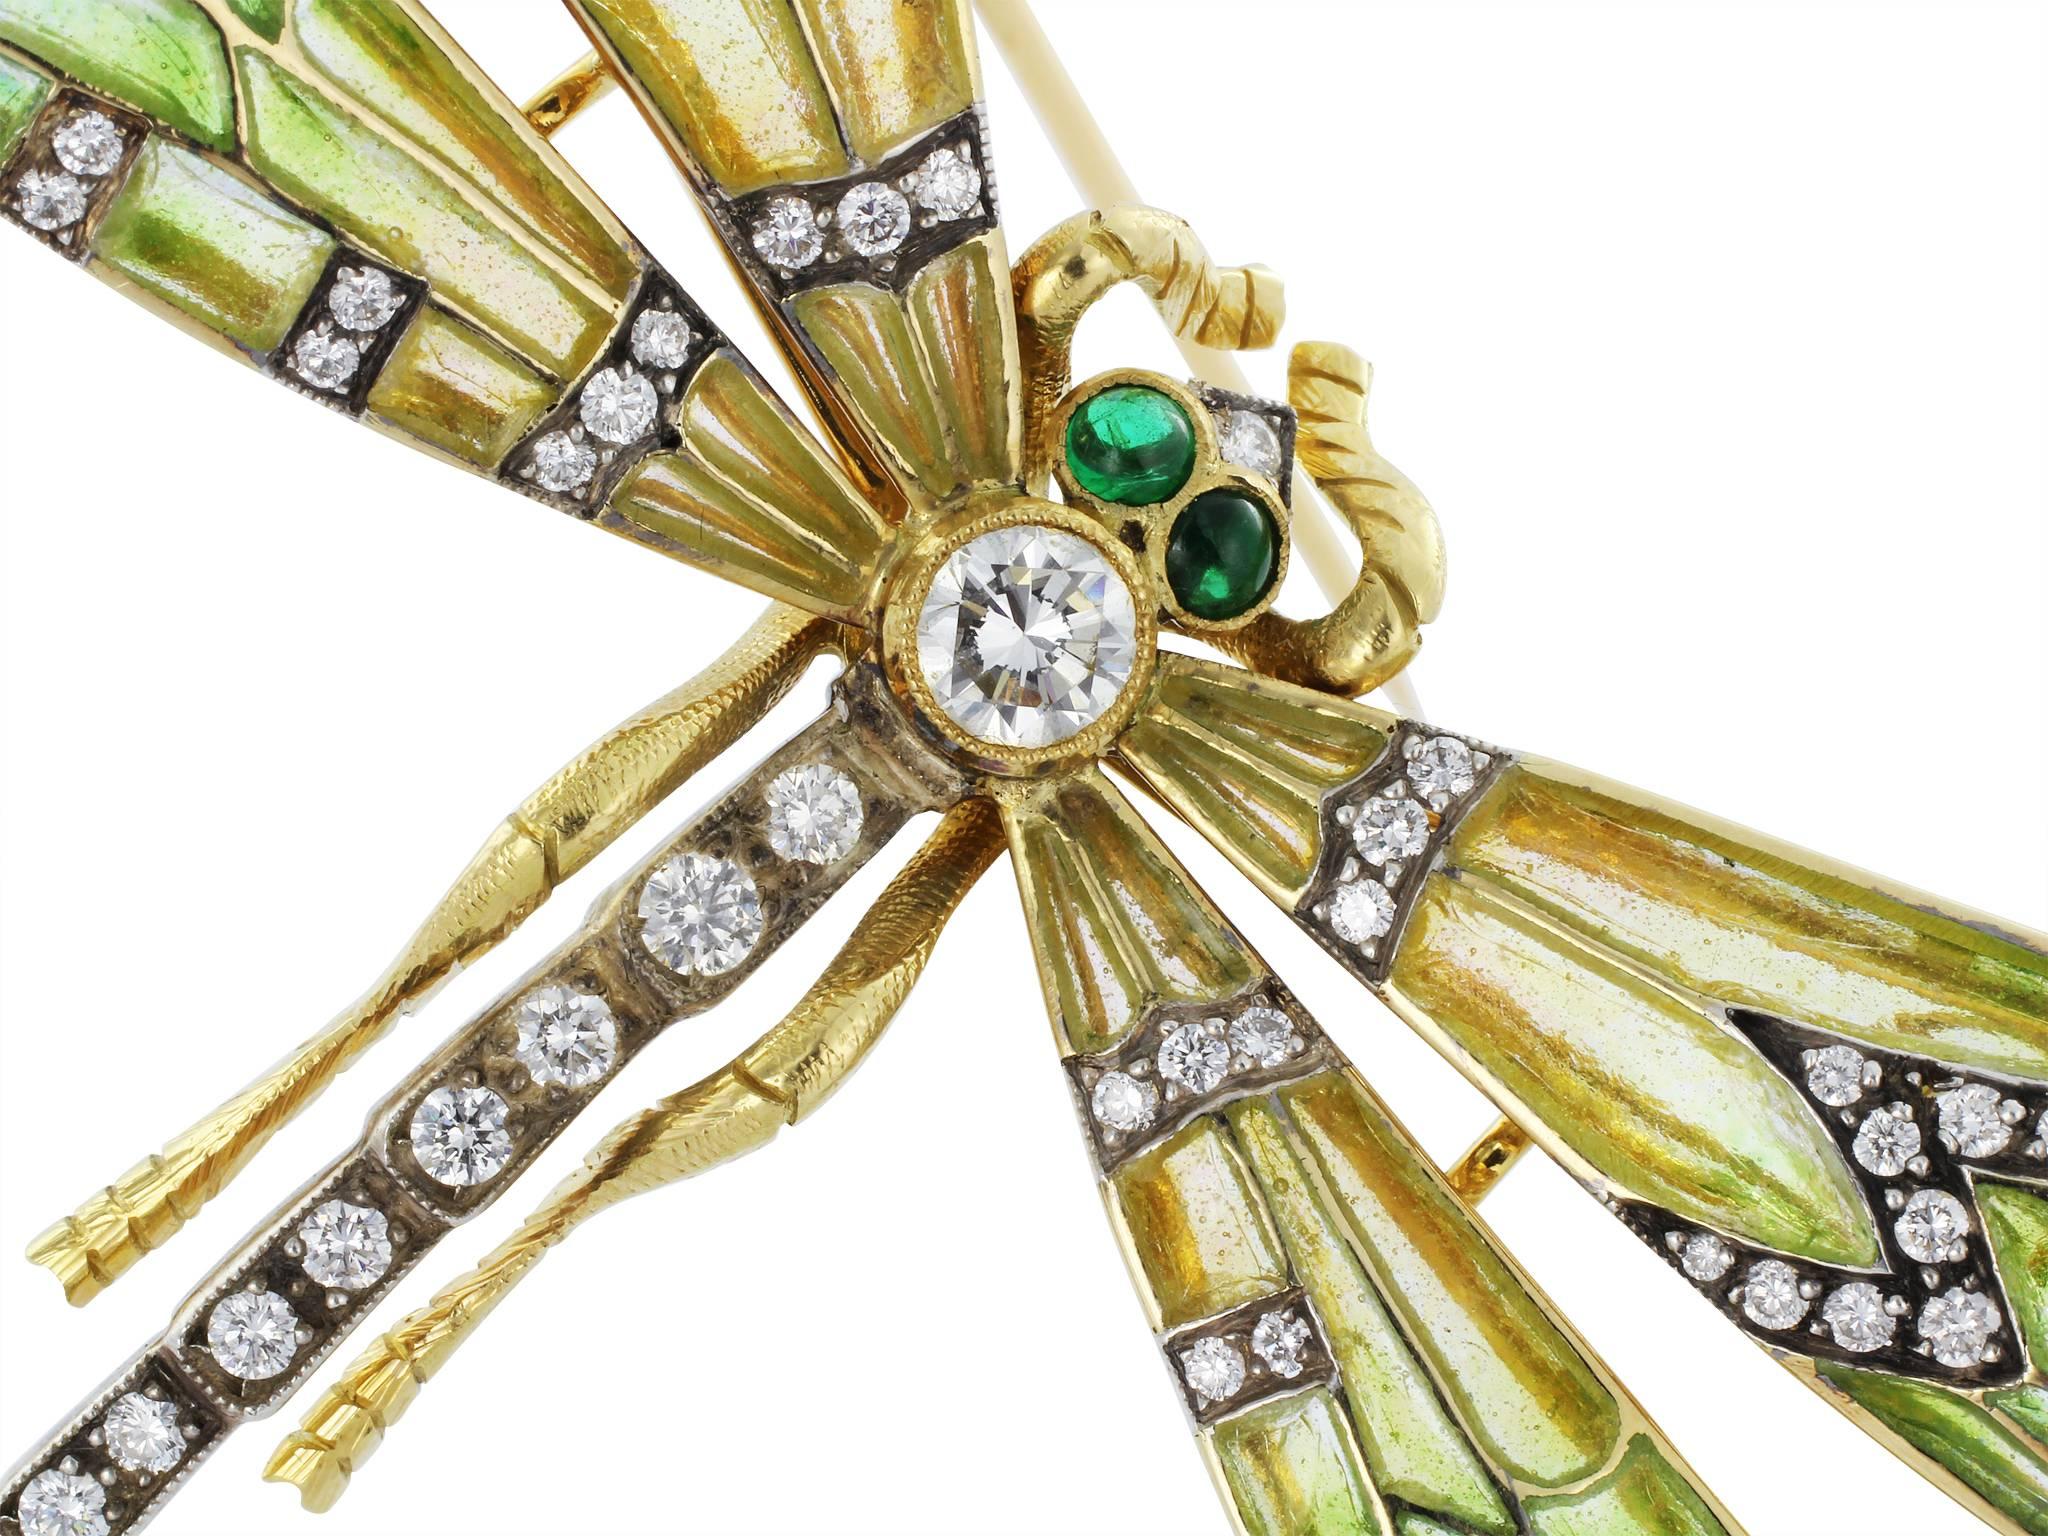 18 karat yellow gold dragonfly pin with yellow, green and blue plique-a-jour wings, set with antique cut diamond accents set on the torso and on the wings and cabochon cut emerald eyes.